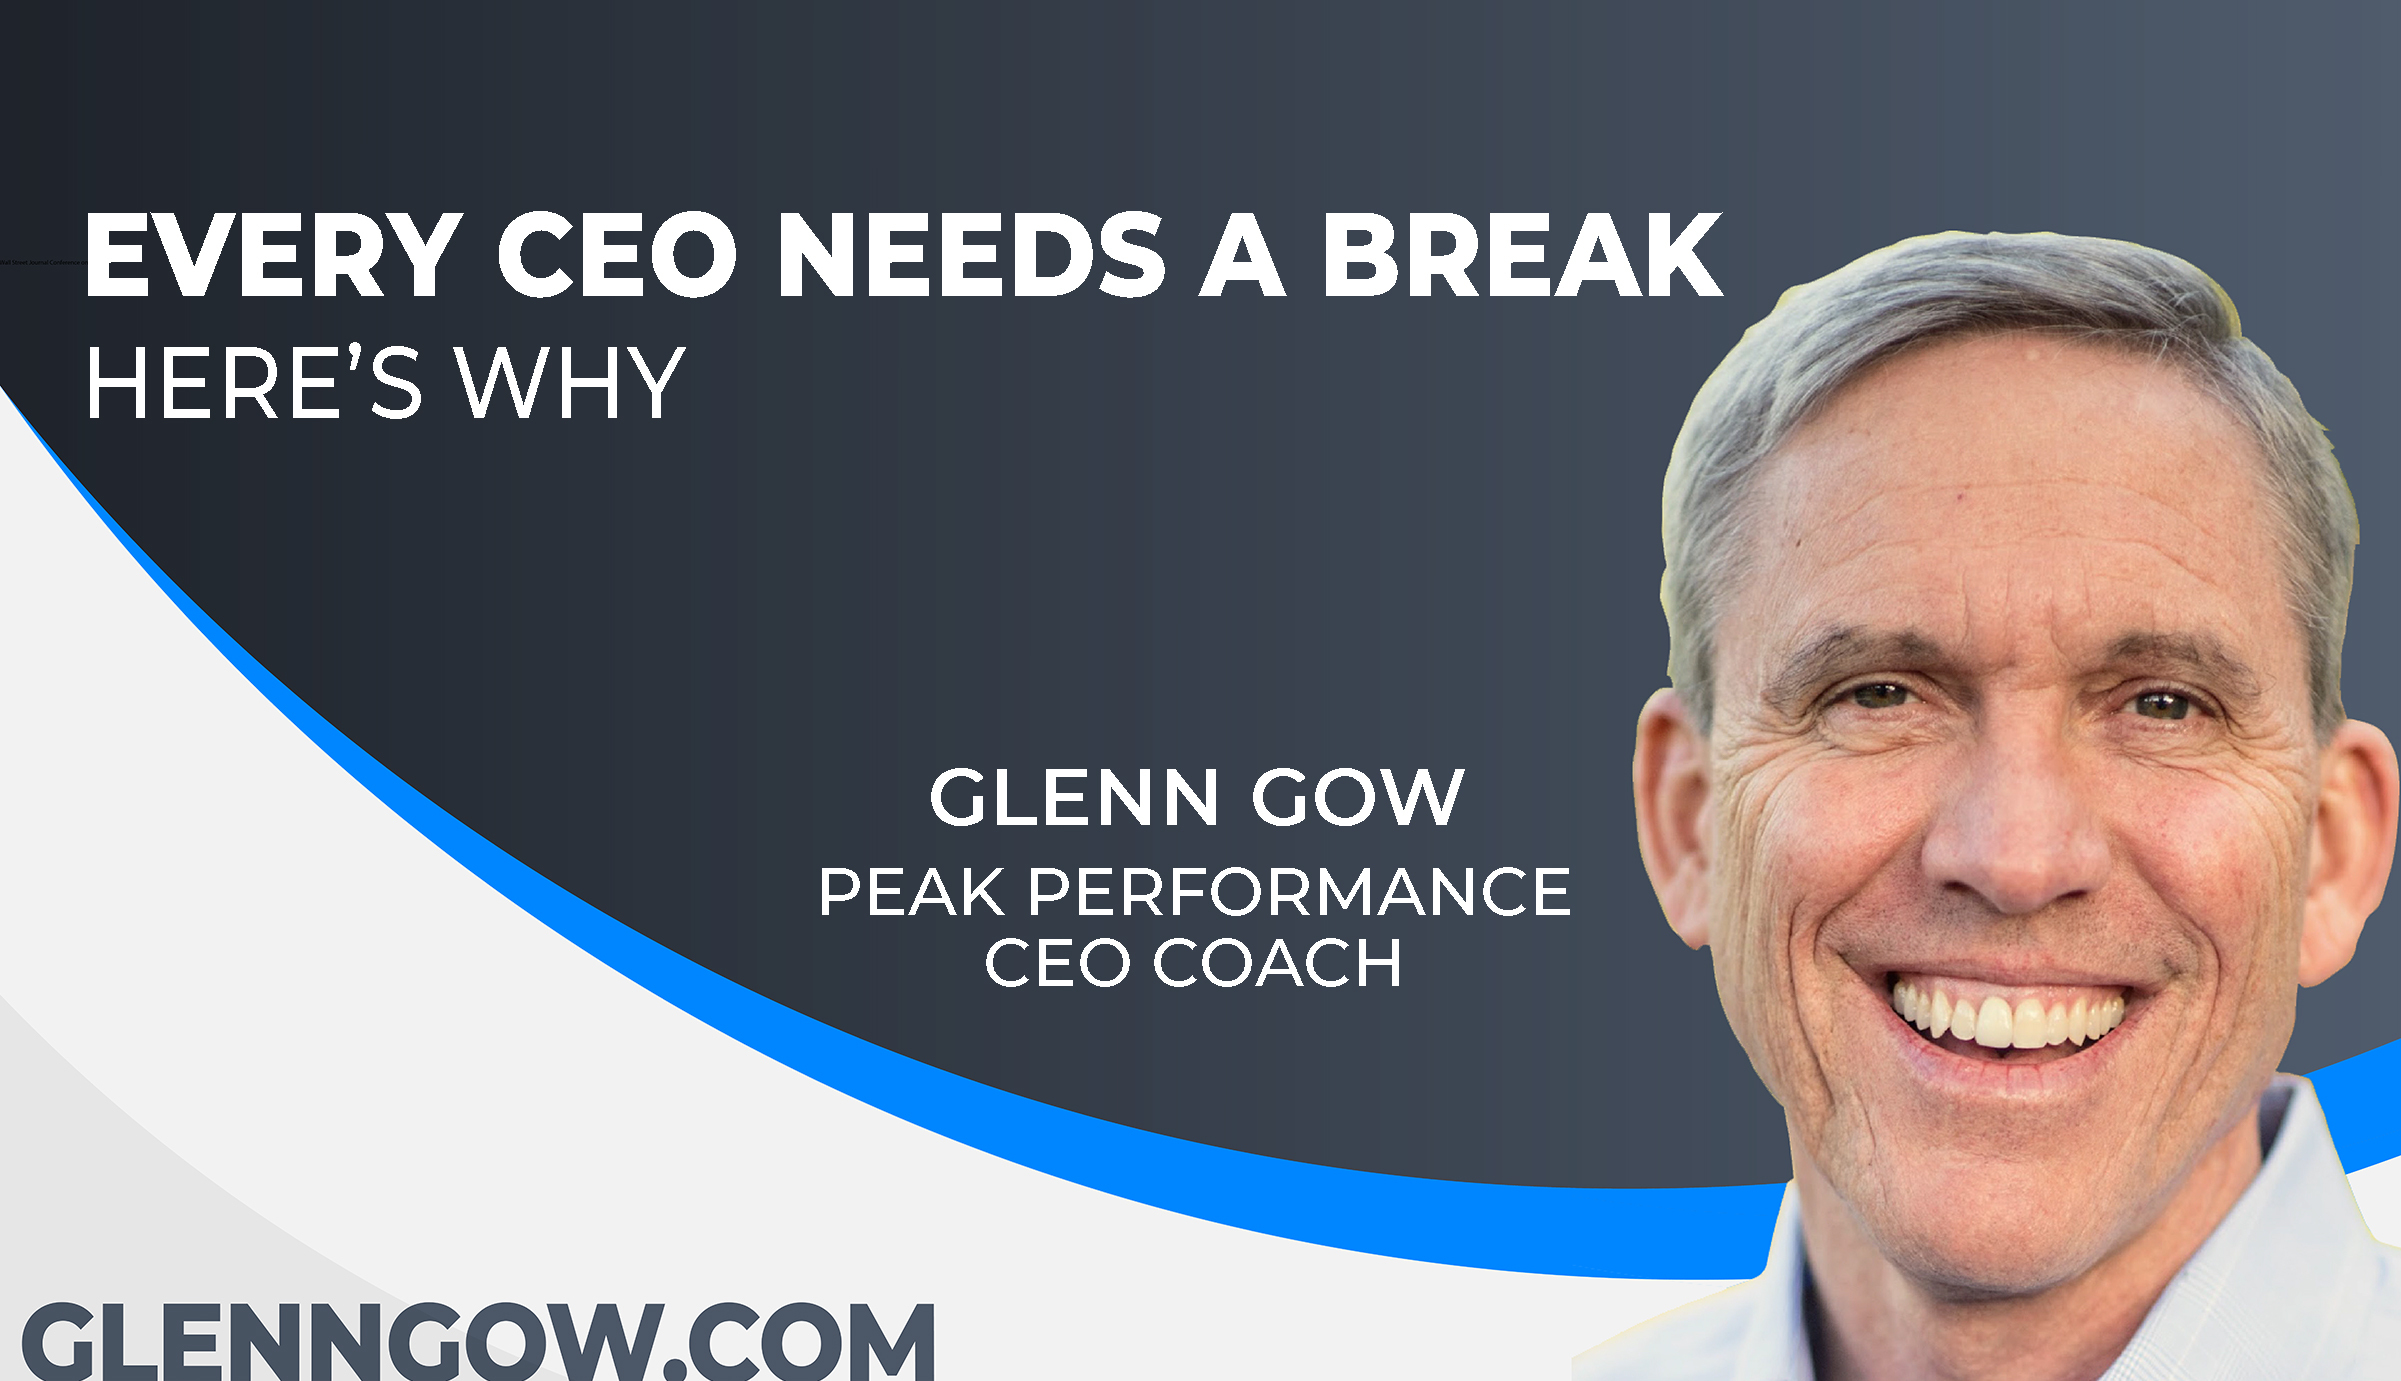 Every ceo needs a break heres why - Blog Graphic